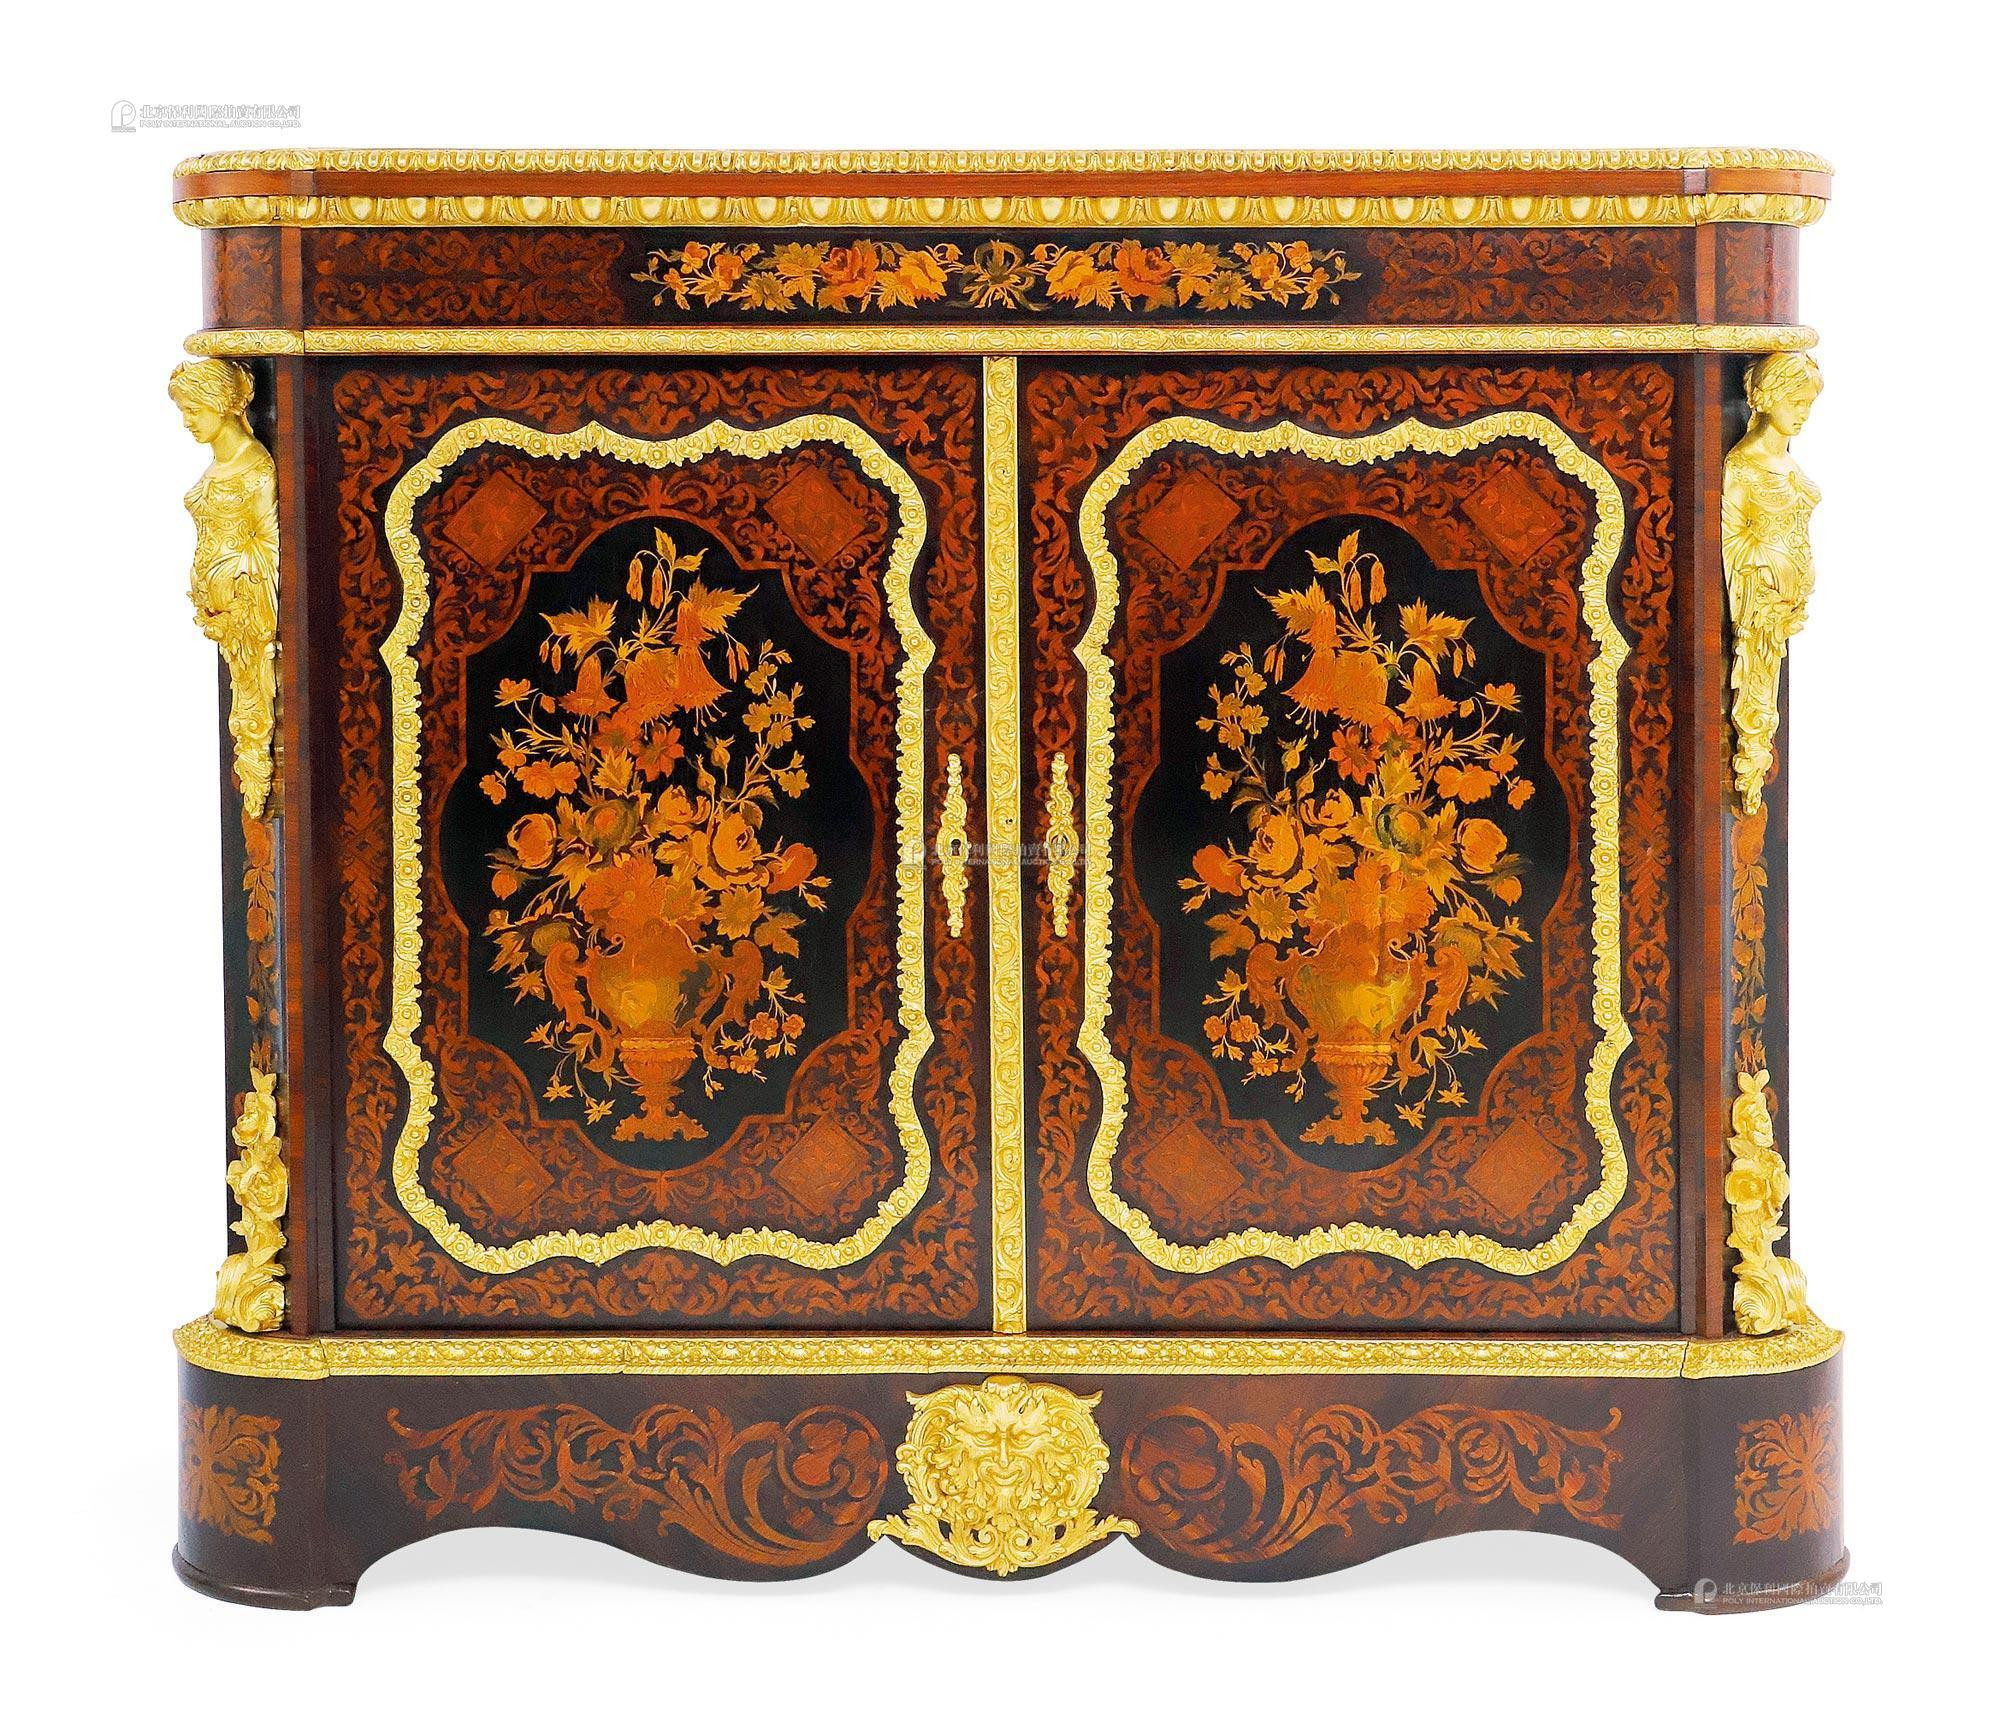 A FRENCH GILT BRONZE MARQUETRY MEUBLE D’APPUI